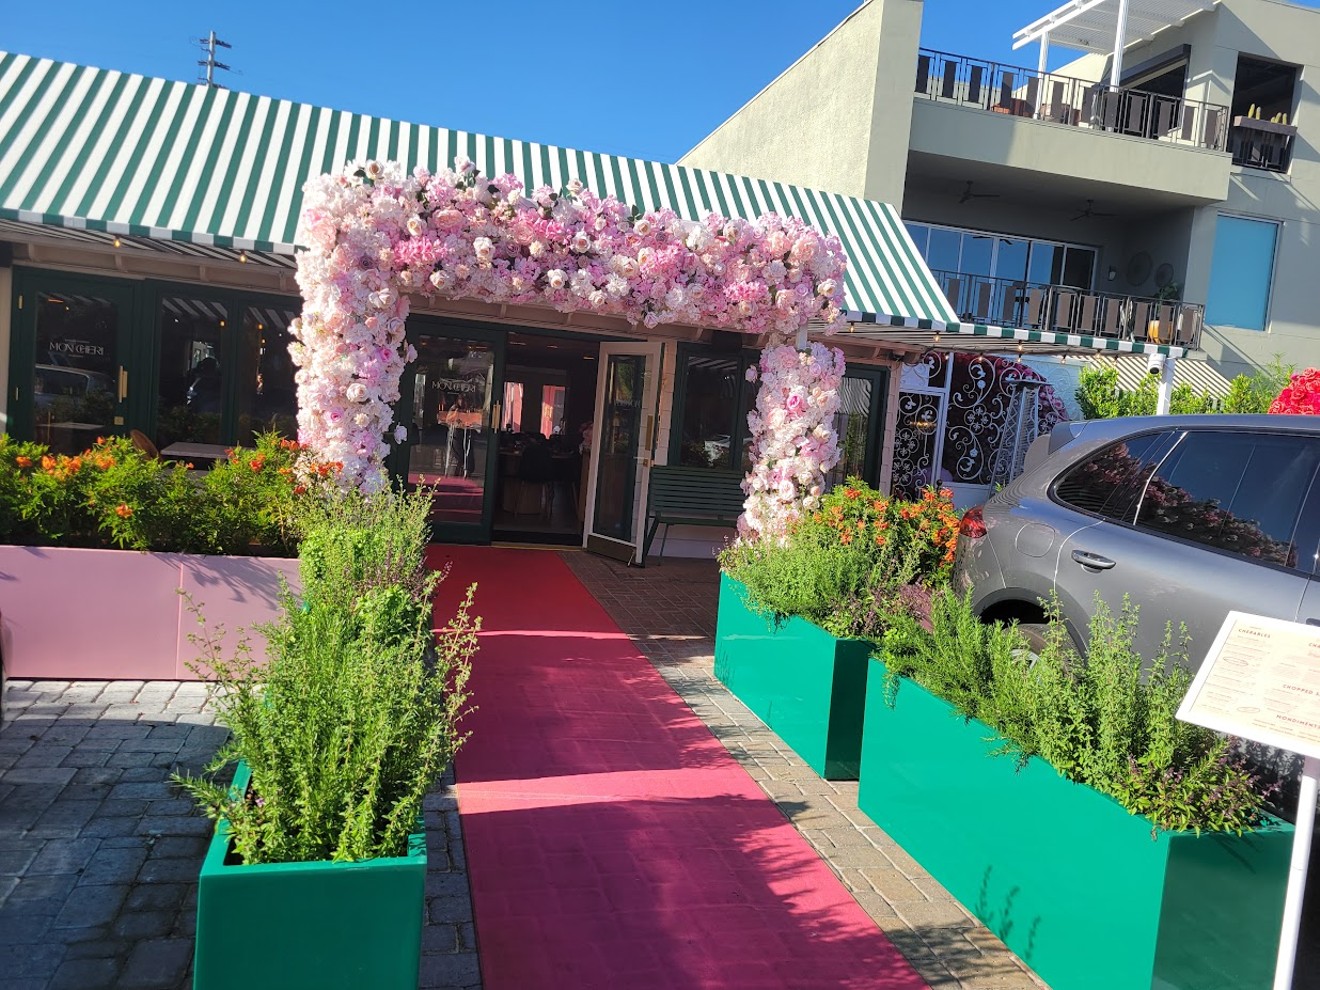 Mon Cheri, complete with its rose-covered entryway, is now open in Old Town Scottsdale.